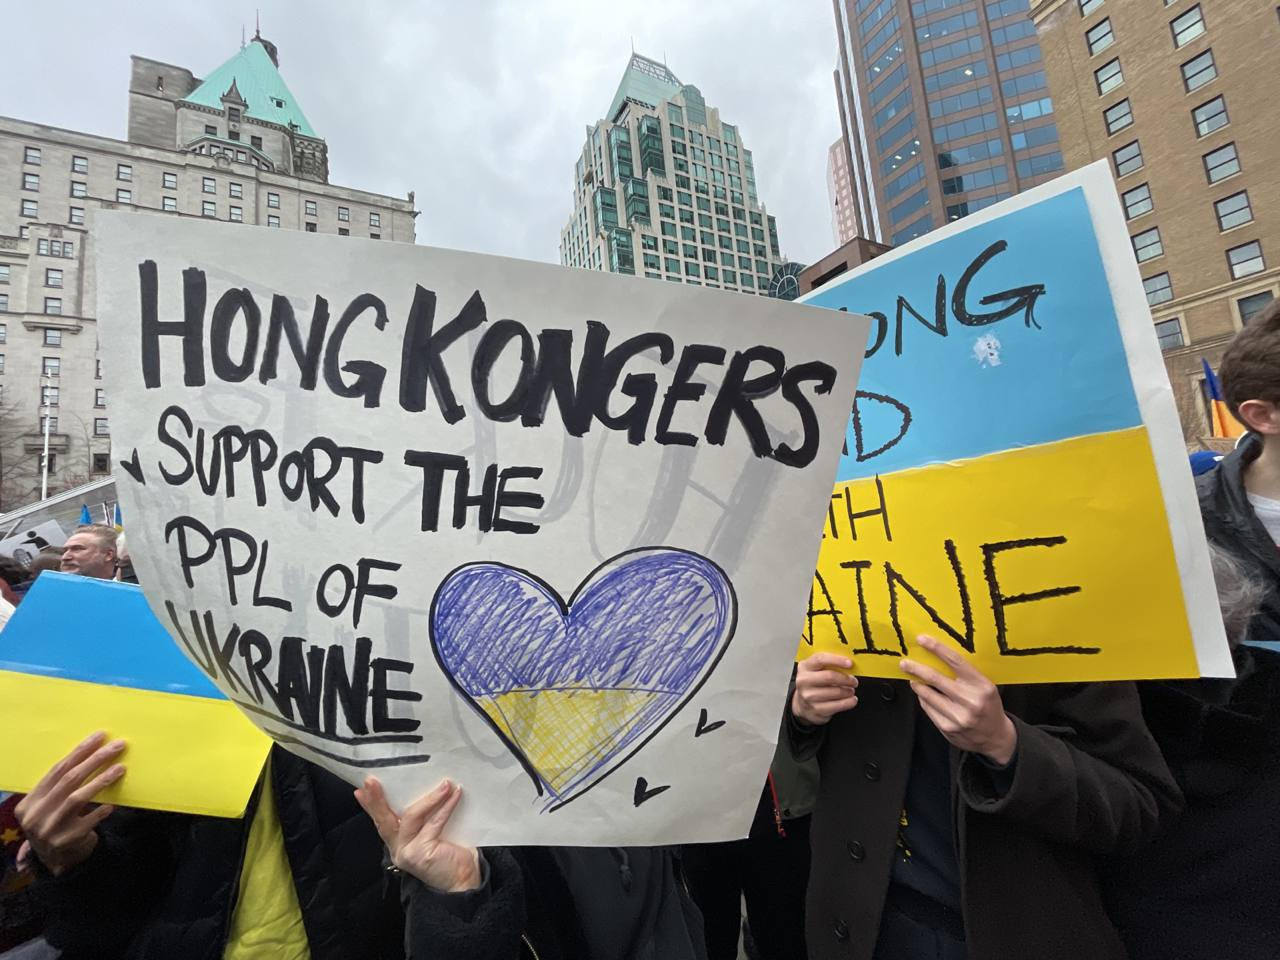 Hong Kong protesters join a rally against Russia’s invasion of Ukraine, in Vancouver, Canada, on February 26. Photo: Instagram / VanActivistsHK